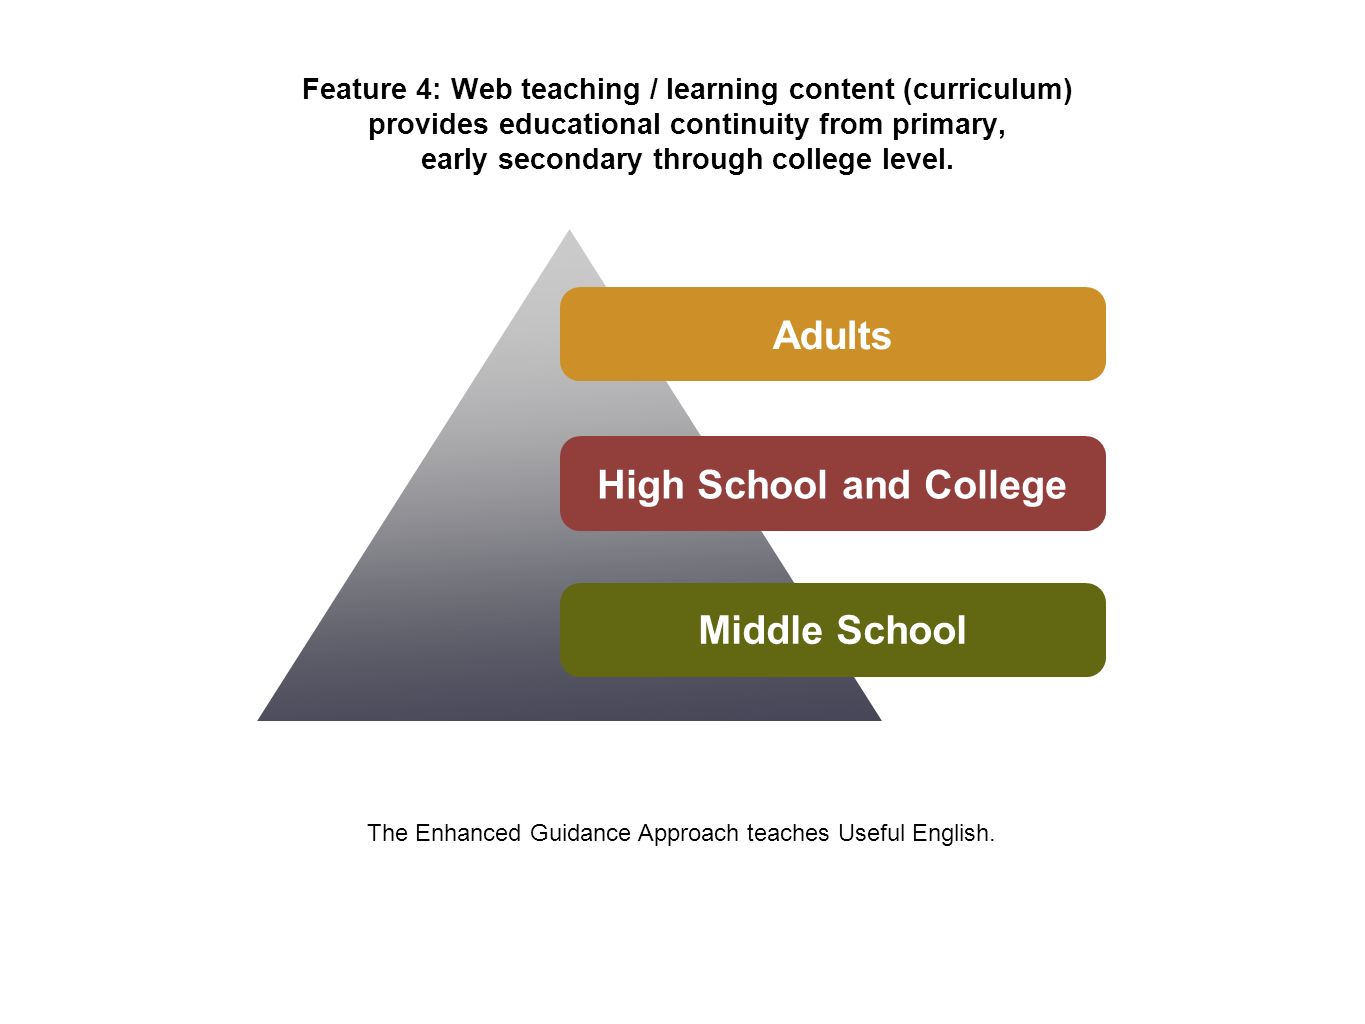 Feature 4: Web teaching / learning content (curriculum) provides educational continuity from primary, early secondary through college level.